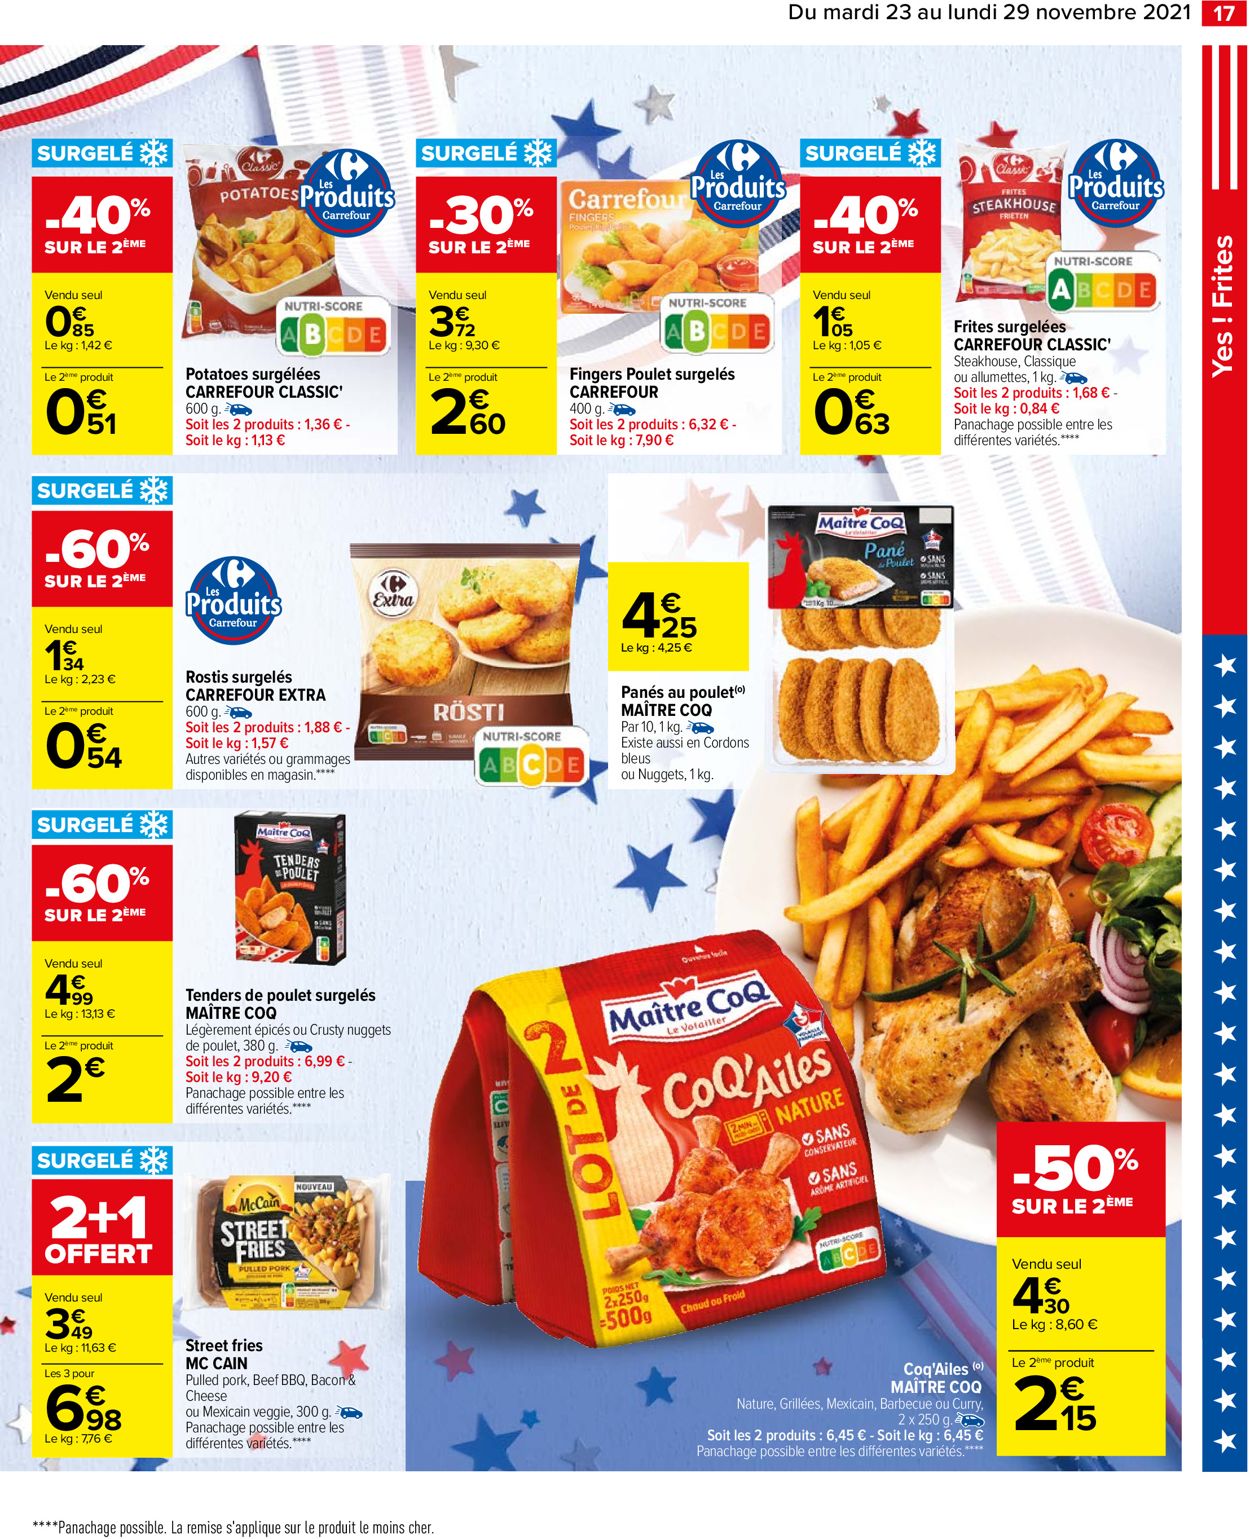 Carrefour BLACK WEEK 2021 Catalogue - 23.11-29.11.2021 (Page 17)